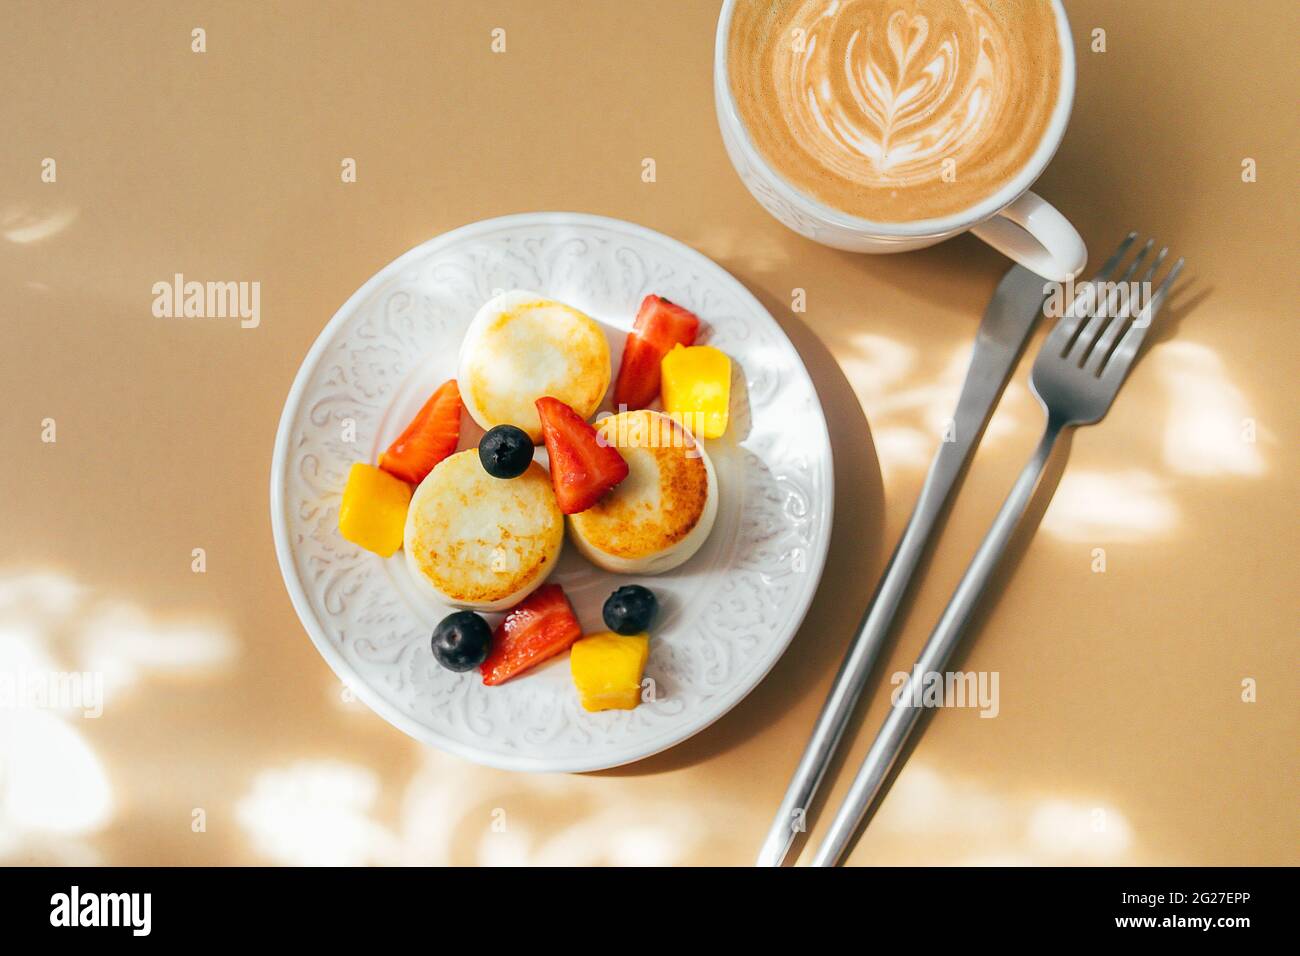 Cottage cheese pancakes on plate, cup of coffee. Syrniki with berry, top view. Stock Photo